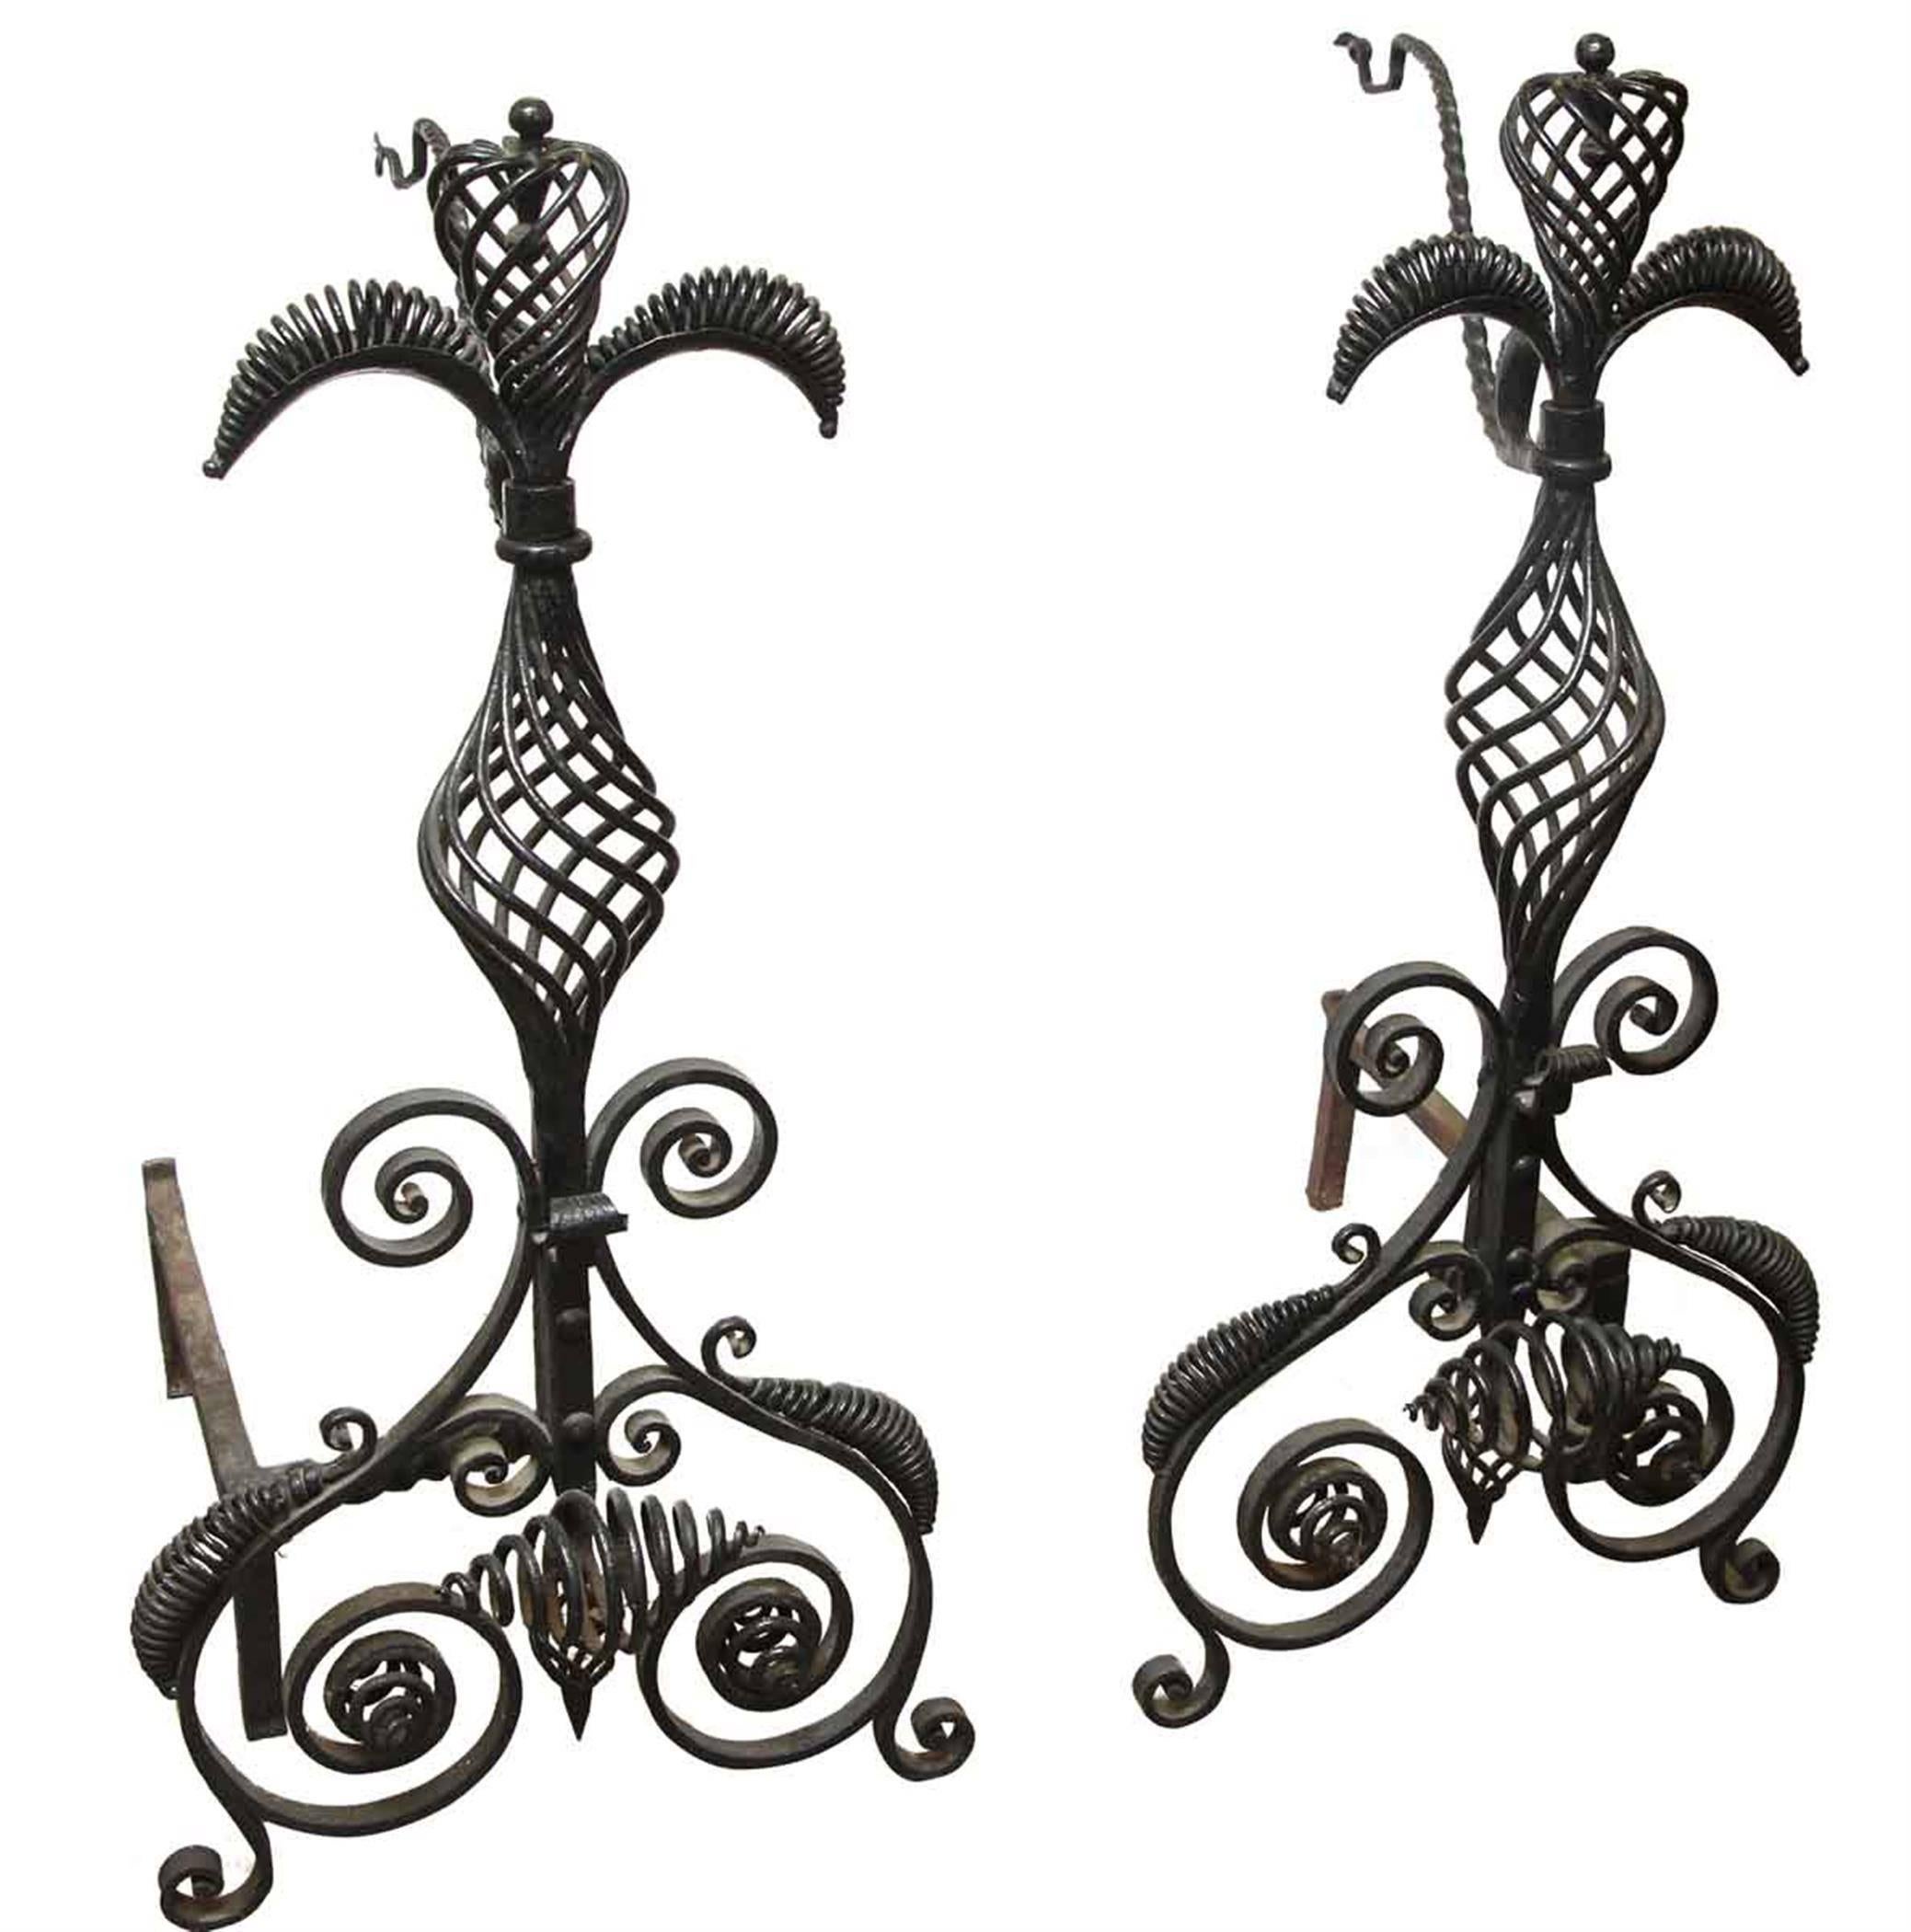 1880s blacksmith work on these all hand-wrought iron andirons for a fireplace. Priced as a pair. This can be viewed at one of our New York City locations. Please inquire for the exact address.